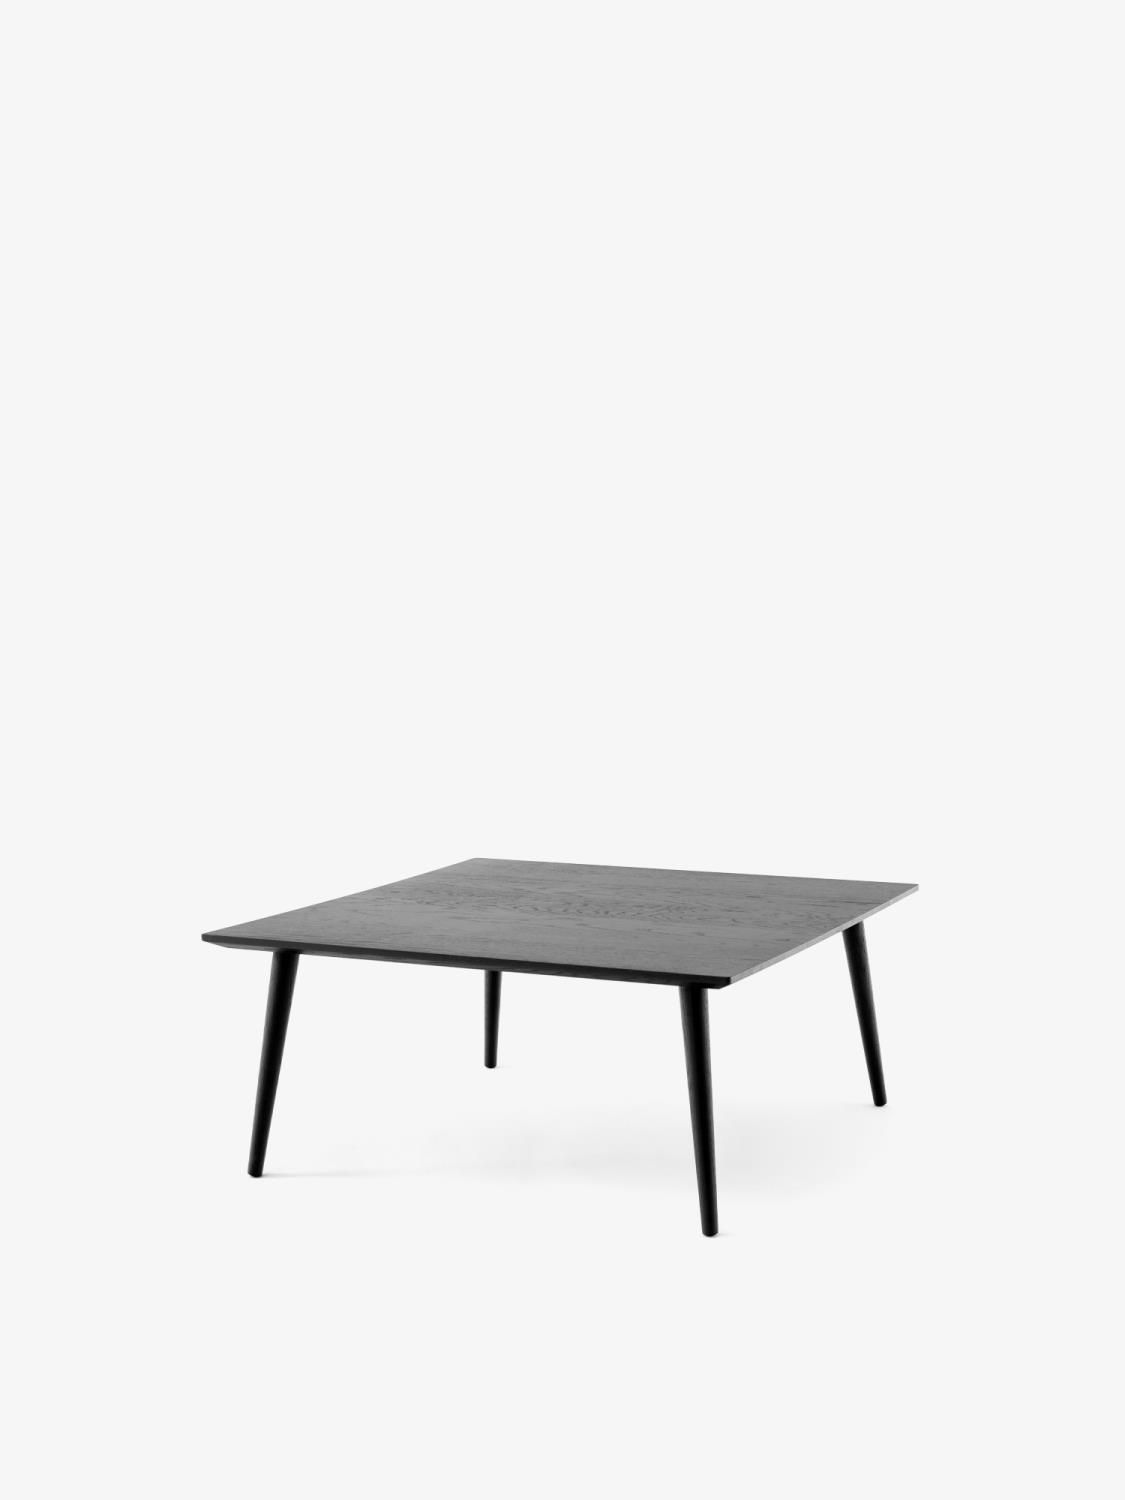 &Tradition - In Between Coffee Table SK24 - Black Lacquered Oak